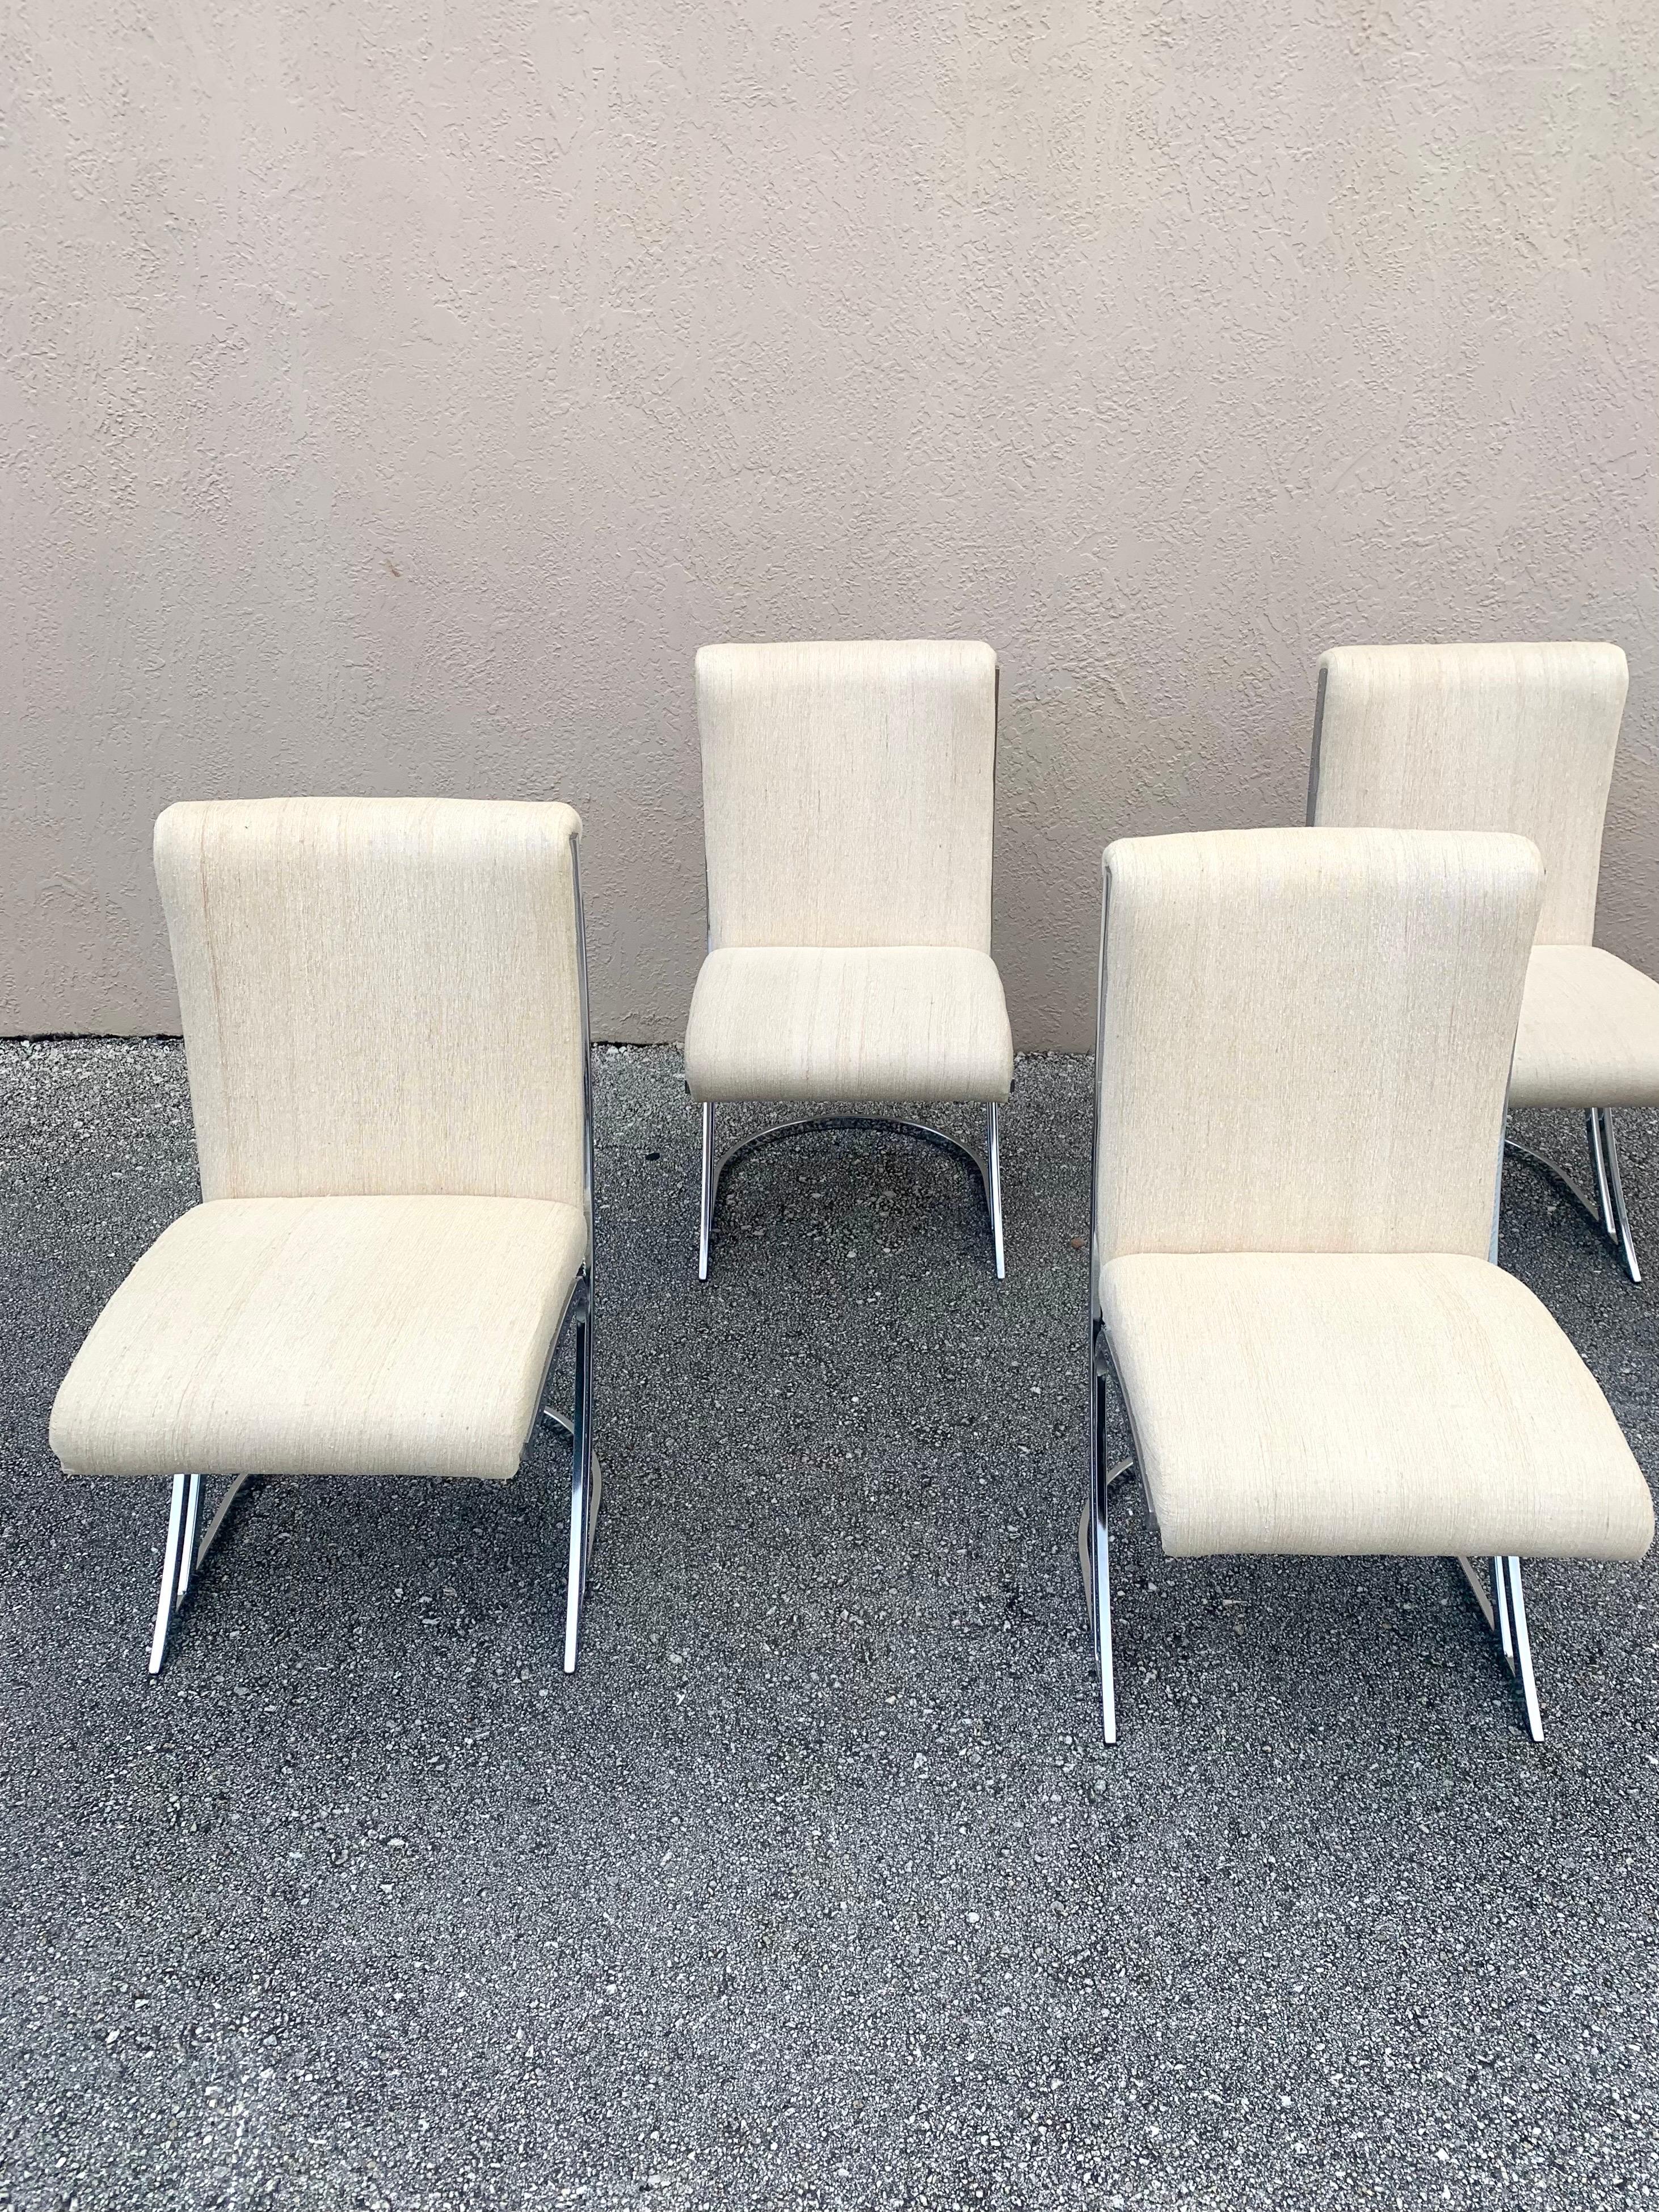 Set of Six Pierre Cardin Crome Dining Chairs, Mid-Century Modern In Good Condition For Sale In Boynton Beach, FL